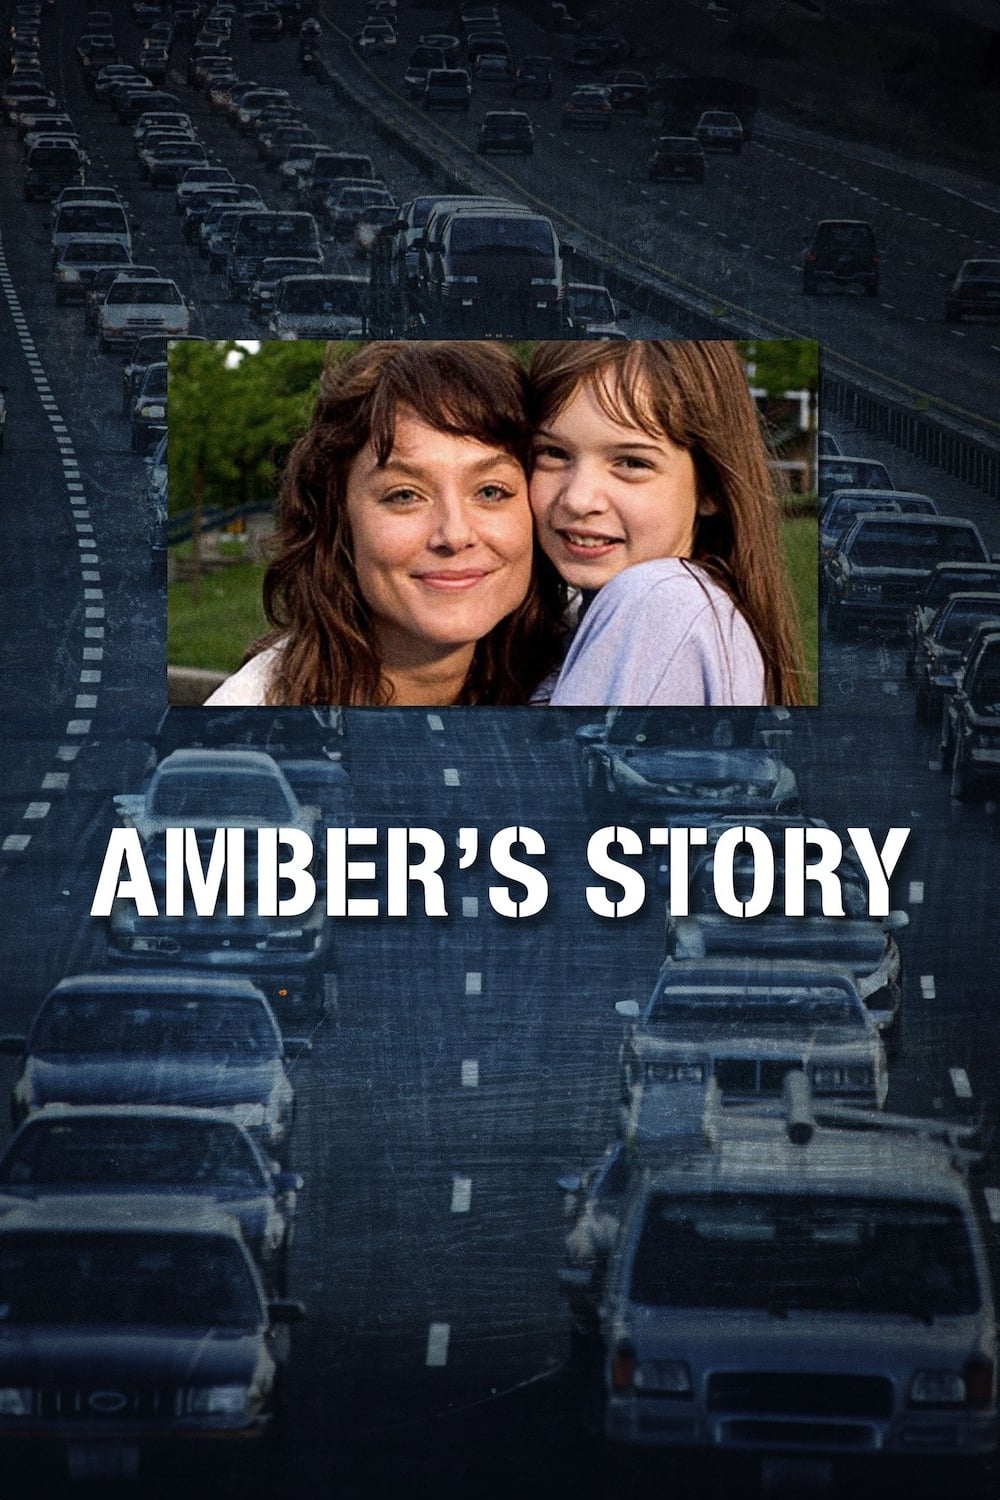 Amber's Story (2006)